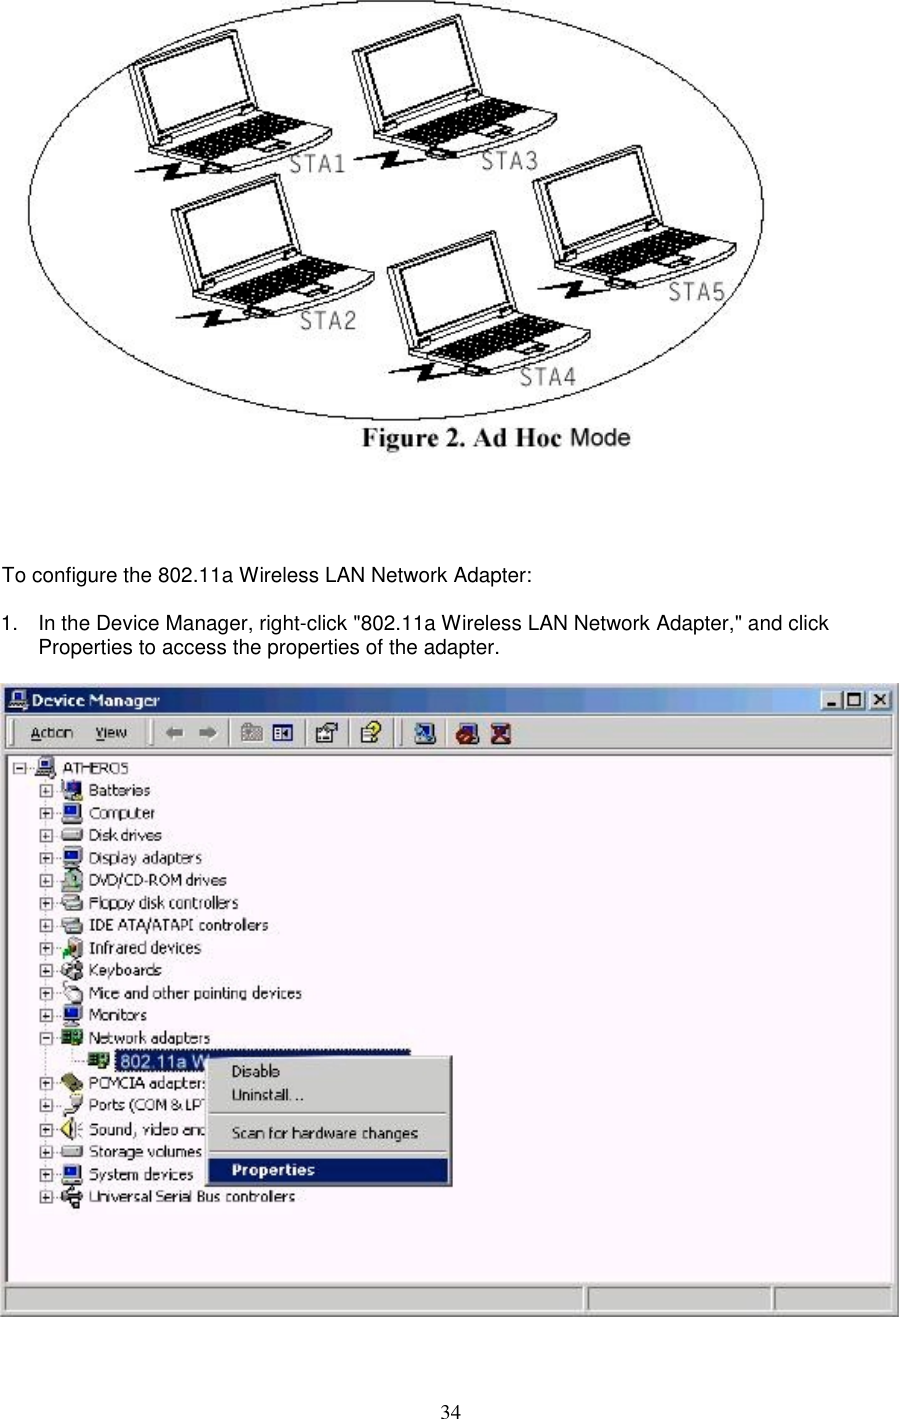 34To configure the 802.11a Wireless LAN Network Adapter:1.  In the Device Manager, right-click &quot;802.11a Wireless LAN Network Adapter,&quot; and clickProperties to access the properties of the adapter.